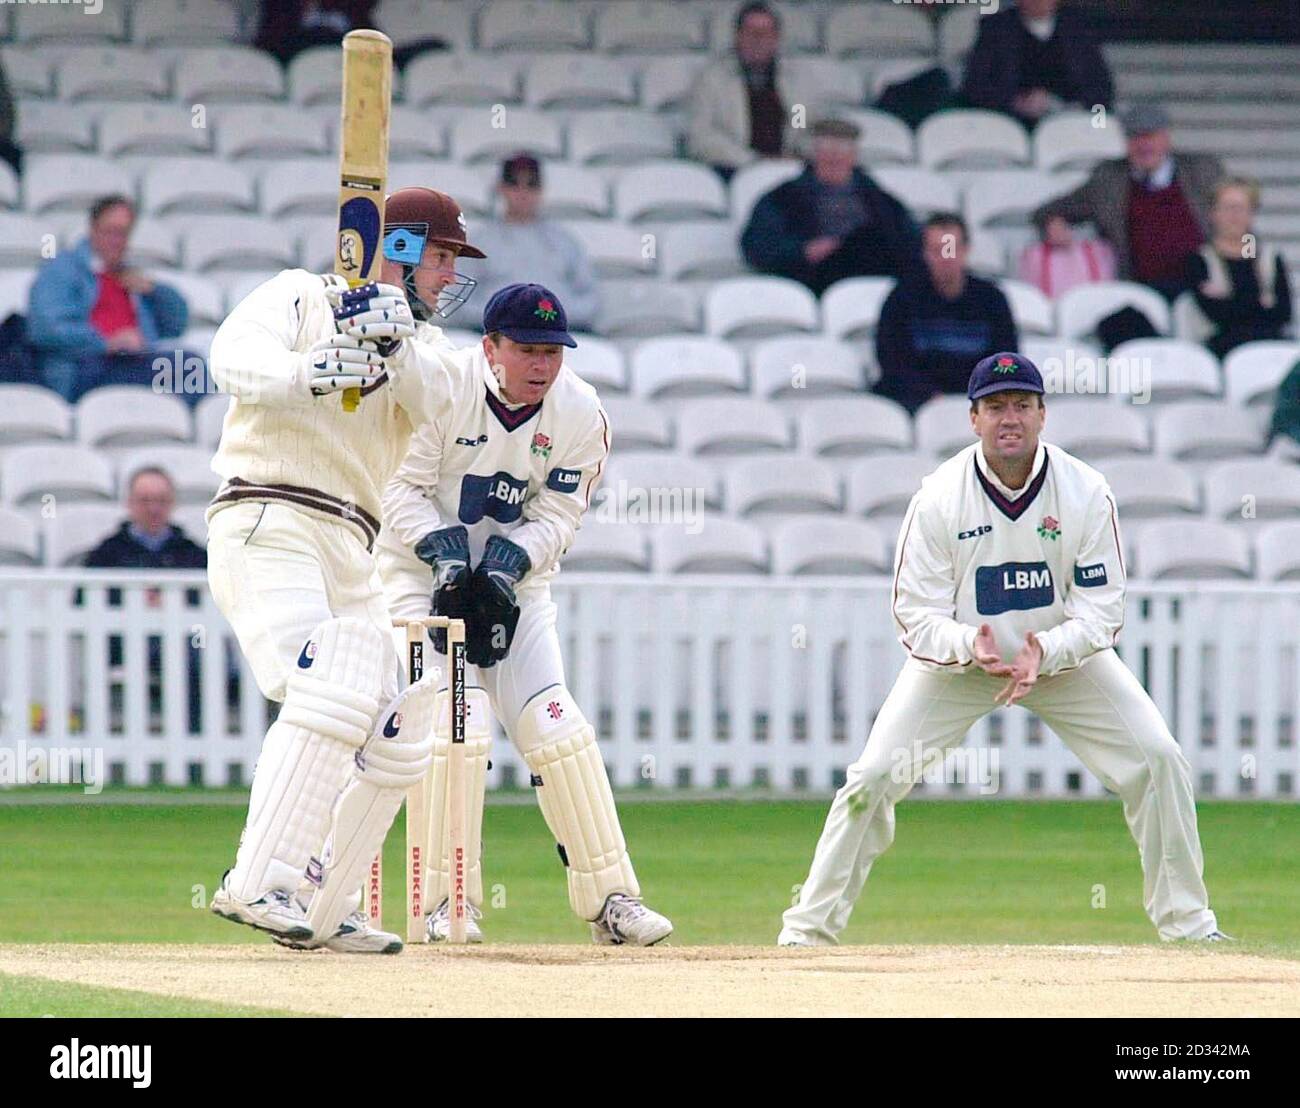 Surrey's Graham Thorpe hits the ball for 4 runs, watched by Lancashire wicketkeeper Warren Hegg and slip fielder Stuart Law, during the Frizzell County Championship match against Lancashire at the Oval, London. Stock Photo